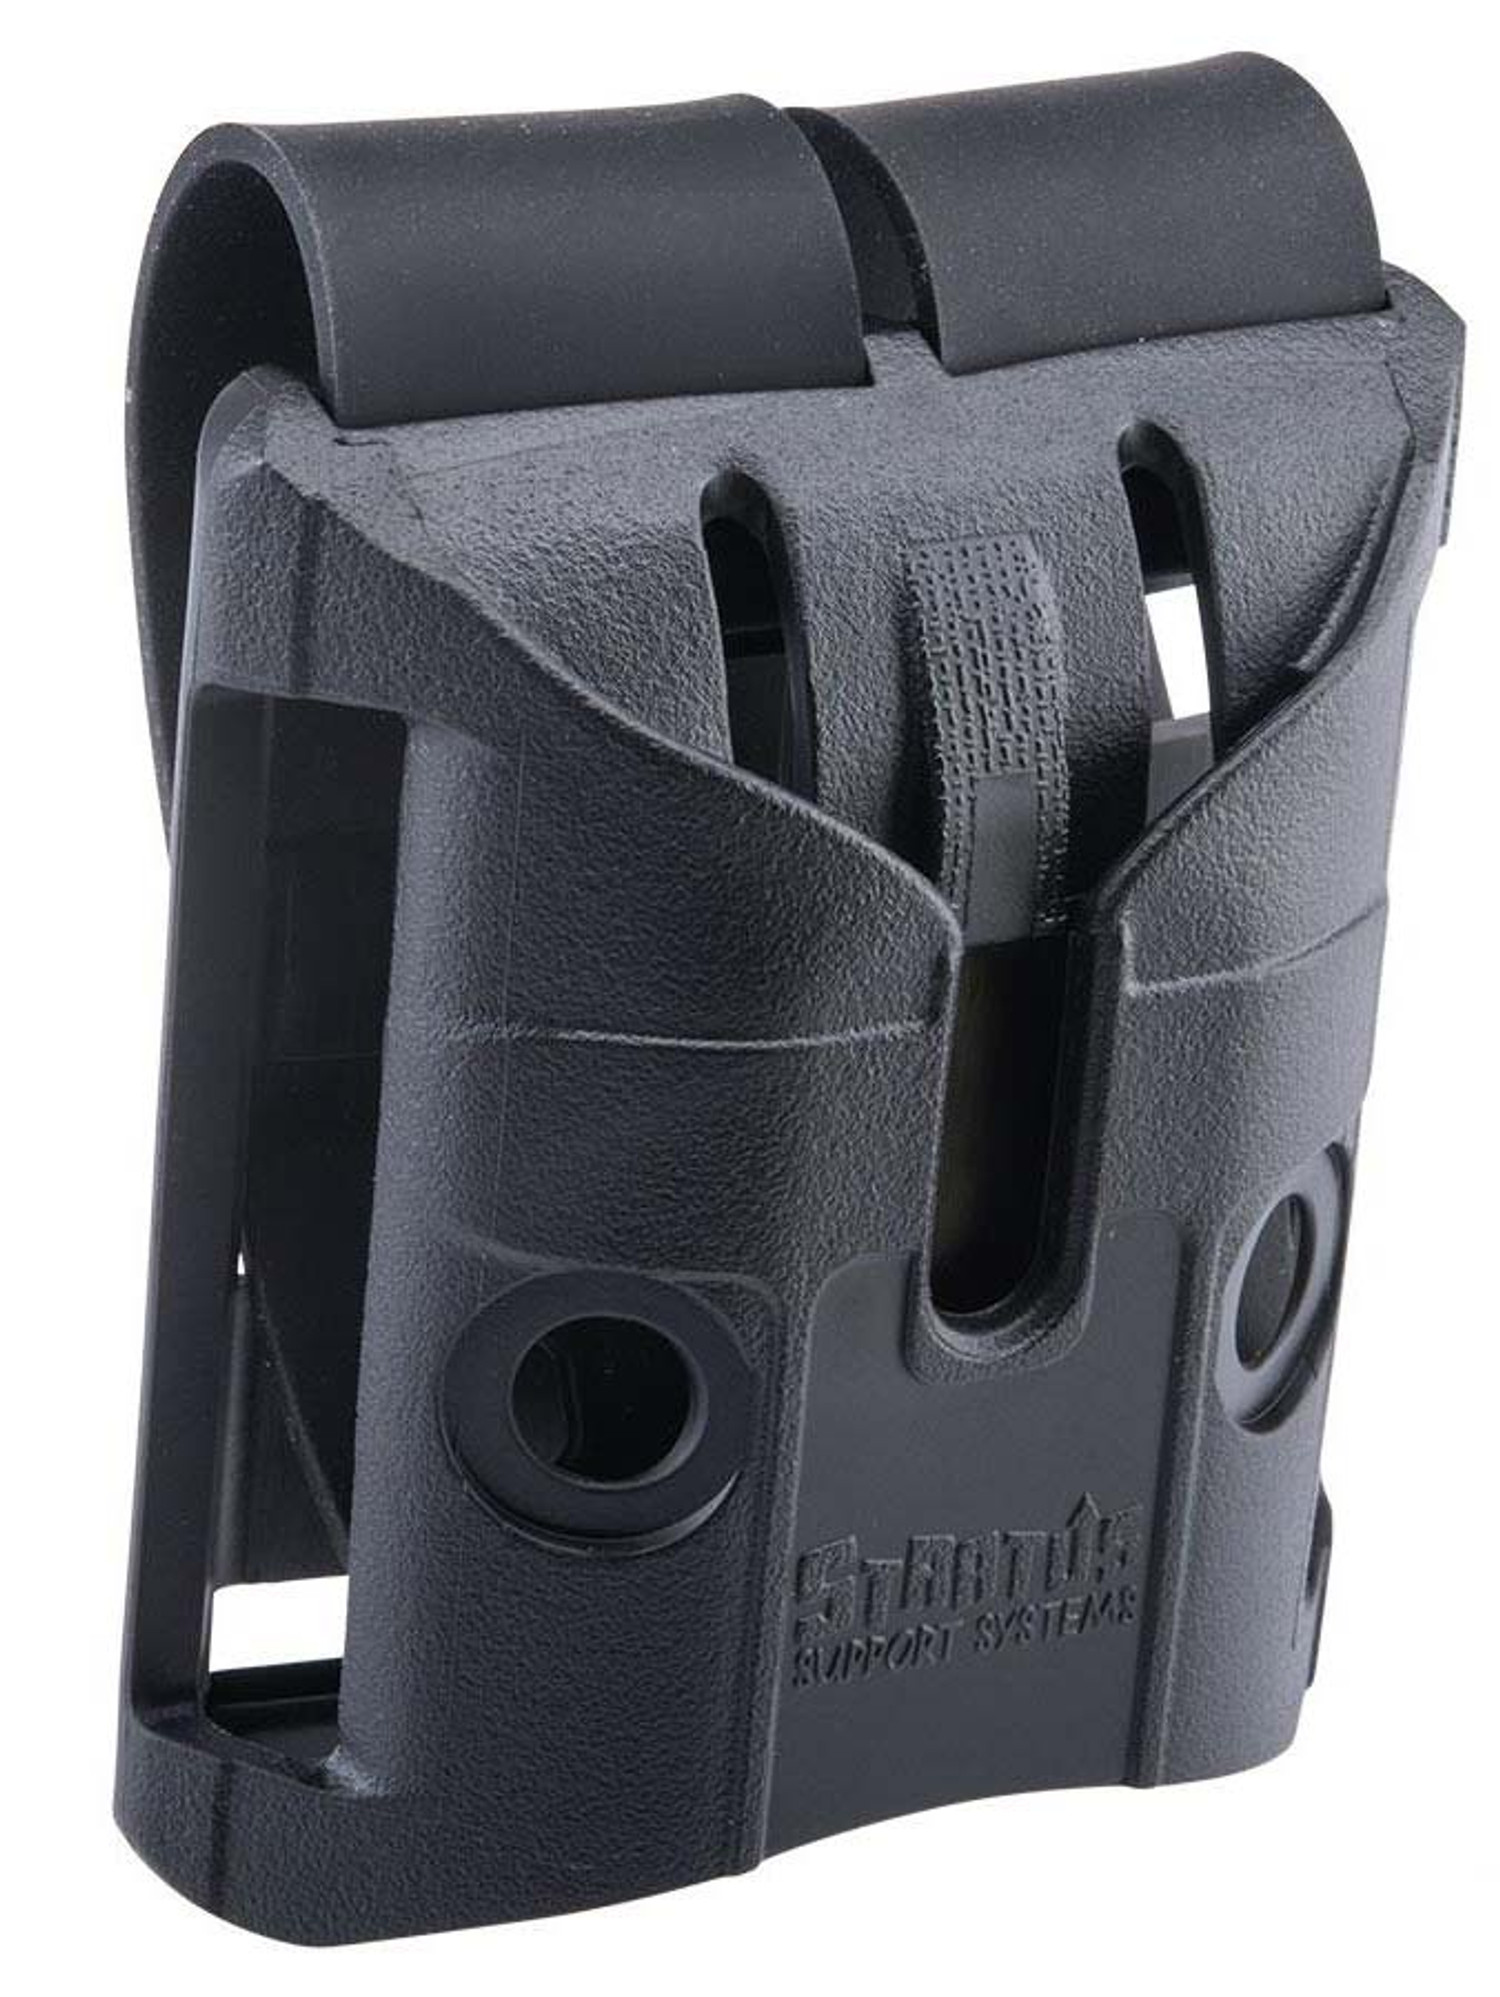 Stratus Support Systems Gen 2 Support & Holster System (Model: Holster Only)